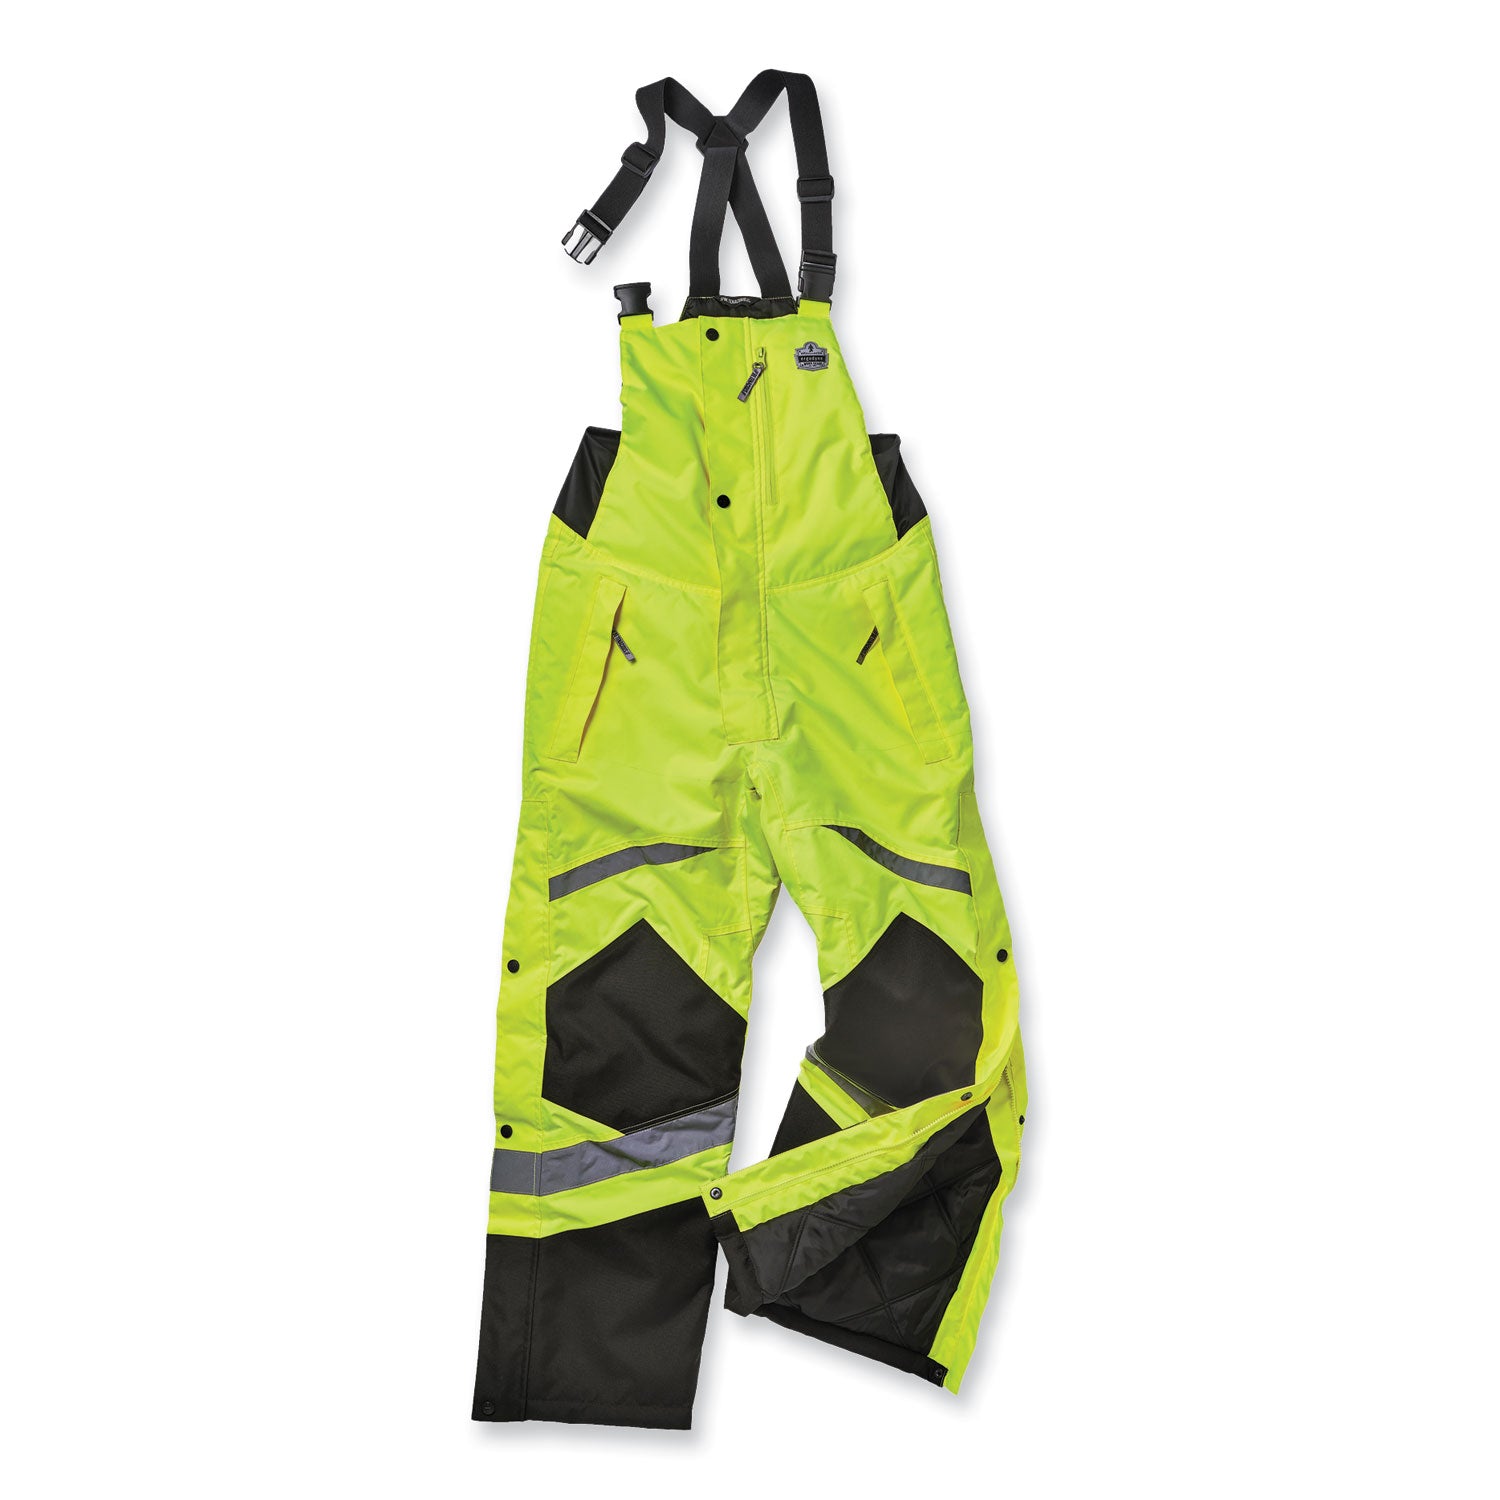 glowear-8928-class-e-hi-vis-insulated-bibs-large-lime-ships-in-1-3-business-days_ego25524 - 1